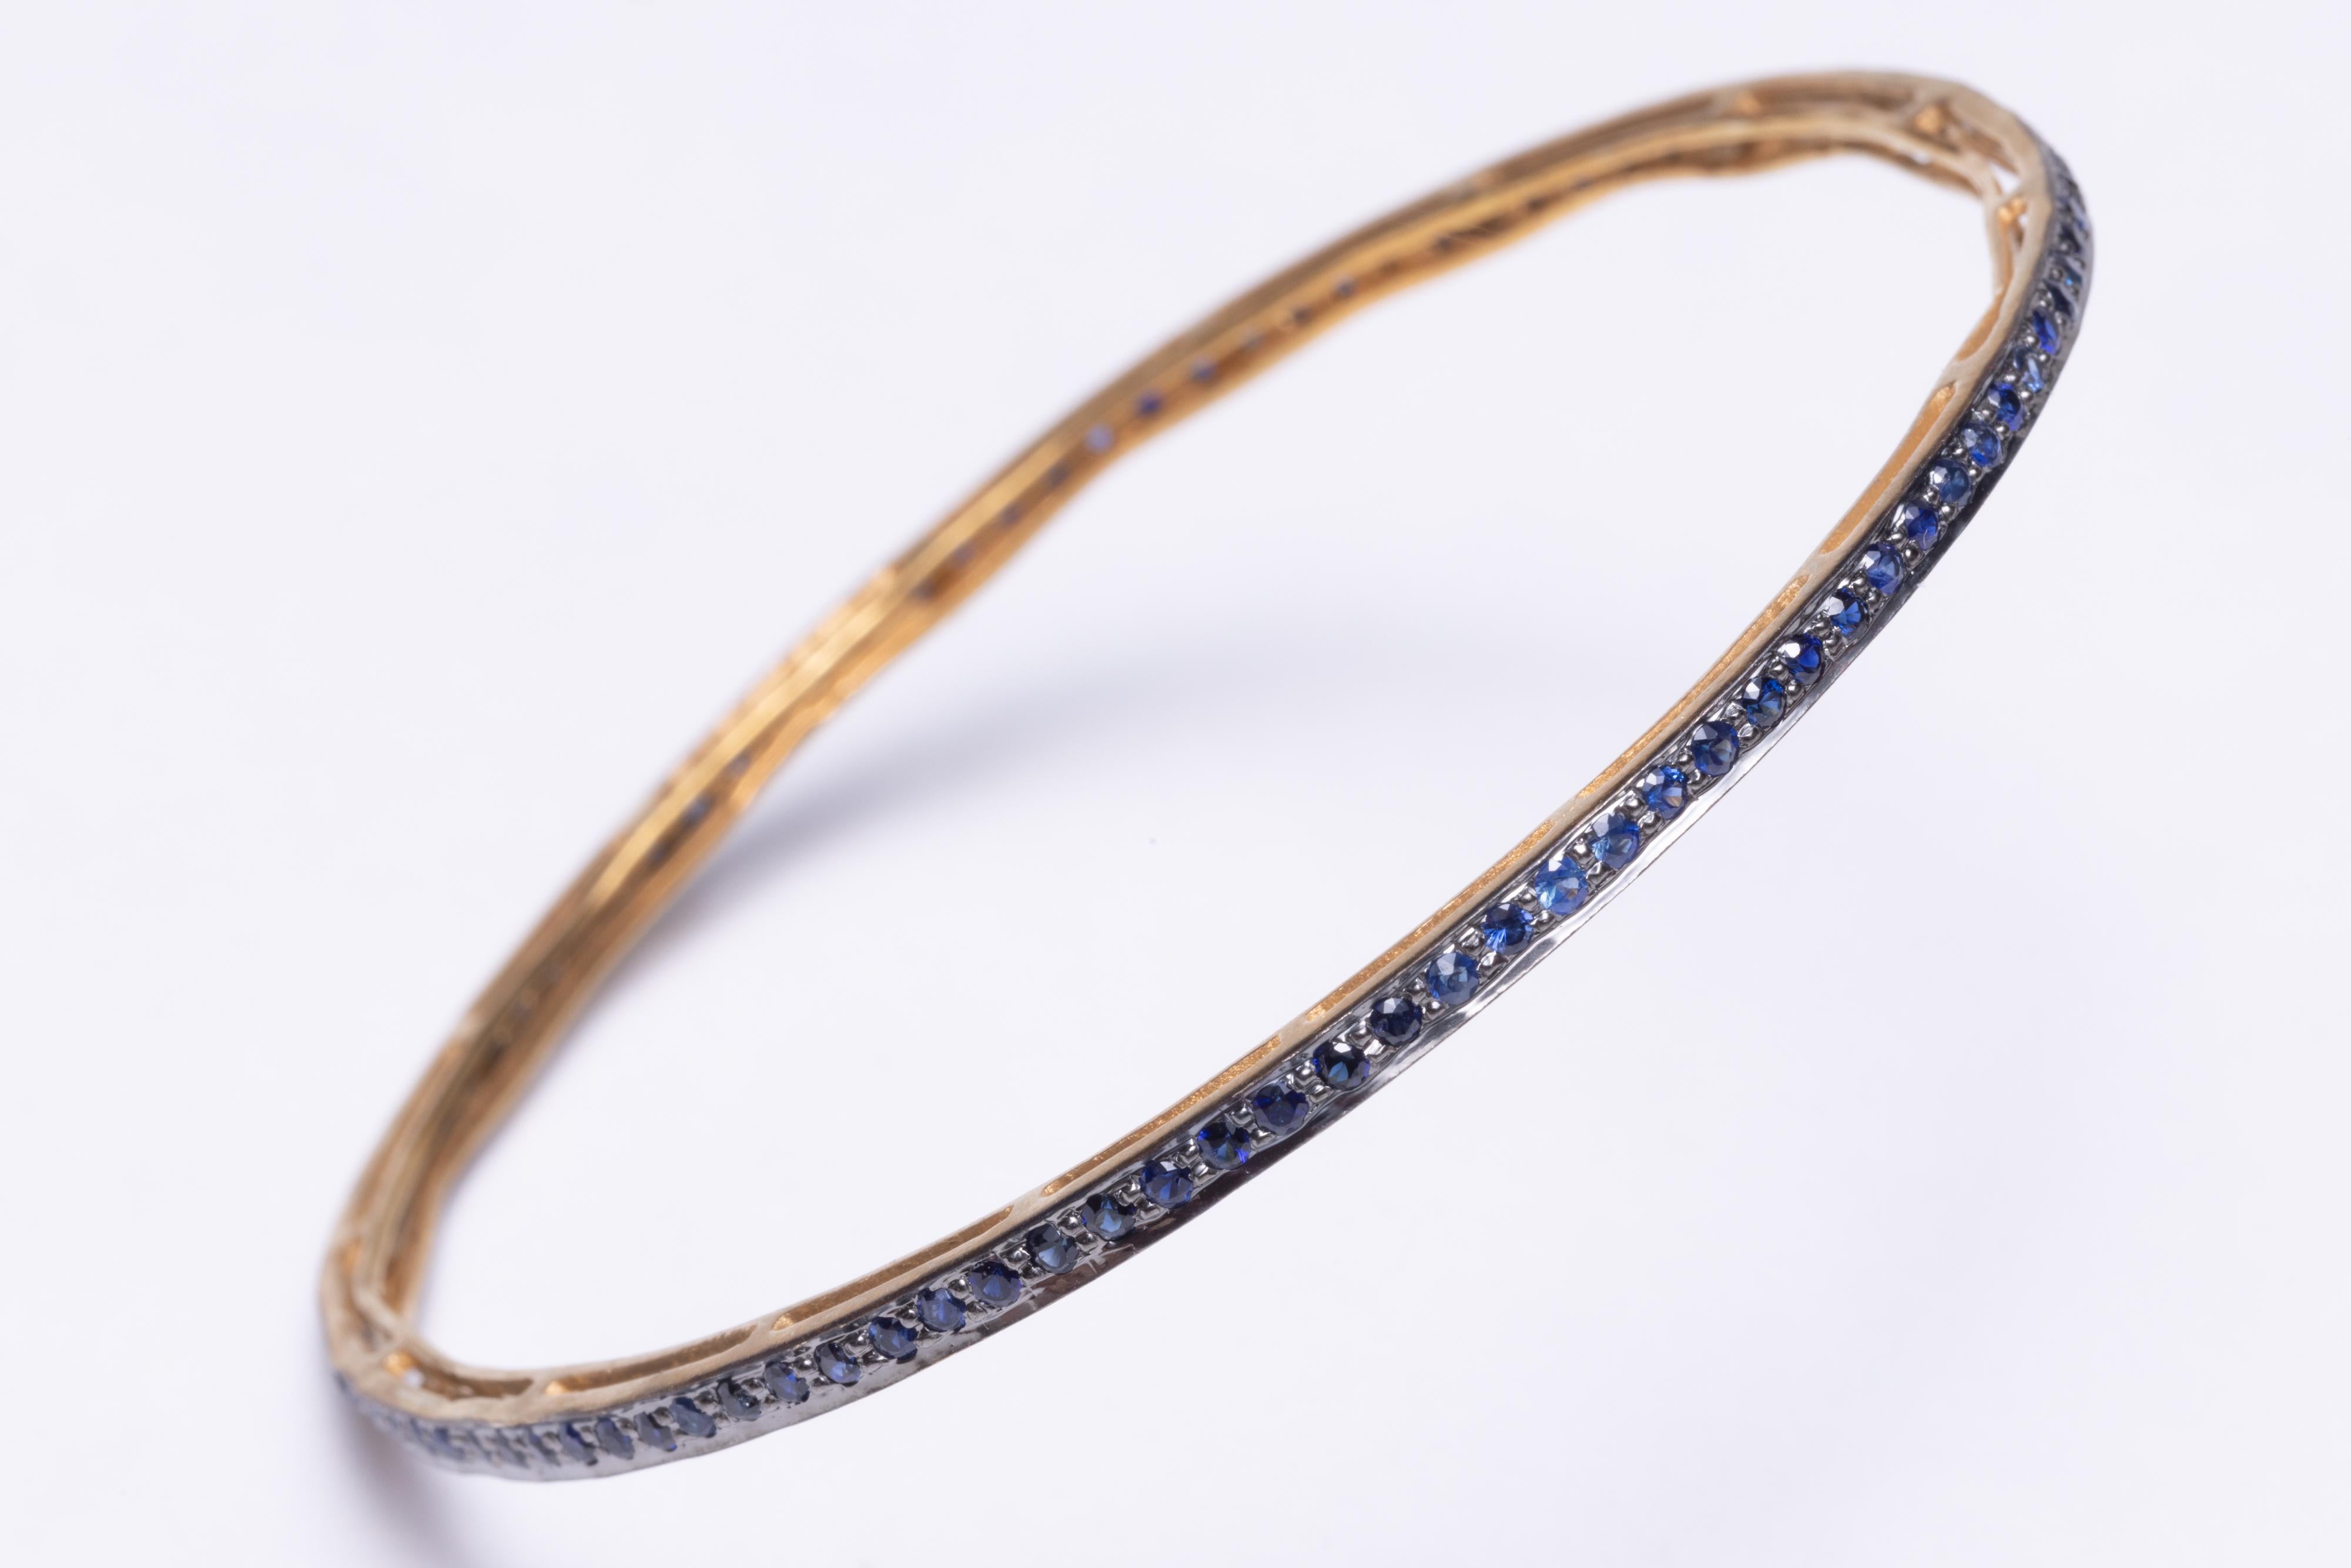 A pair of faceted, round sapphire bangles in an 18K gold setting.  Inside circumference measures 2.5